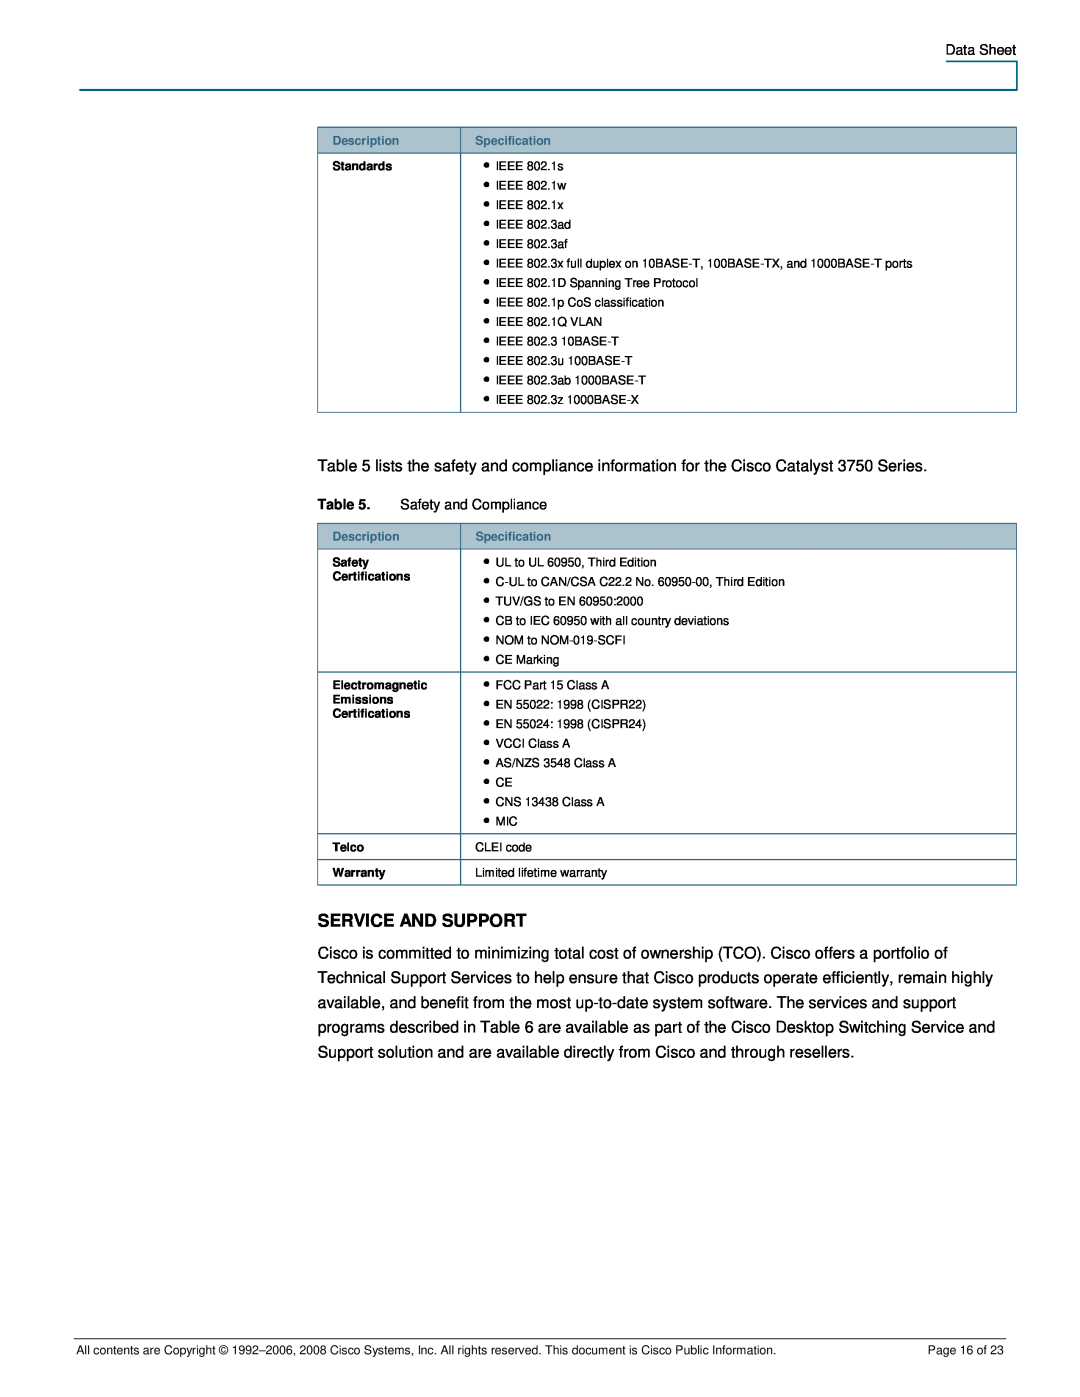 Cisco Systems 3750-24PS, 3750-48PS manual Service And Support, Page 16 of 